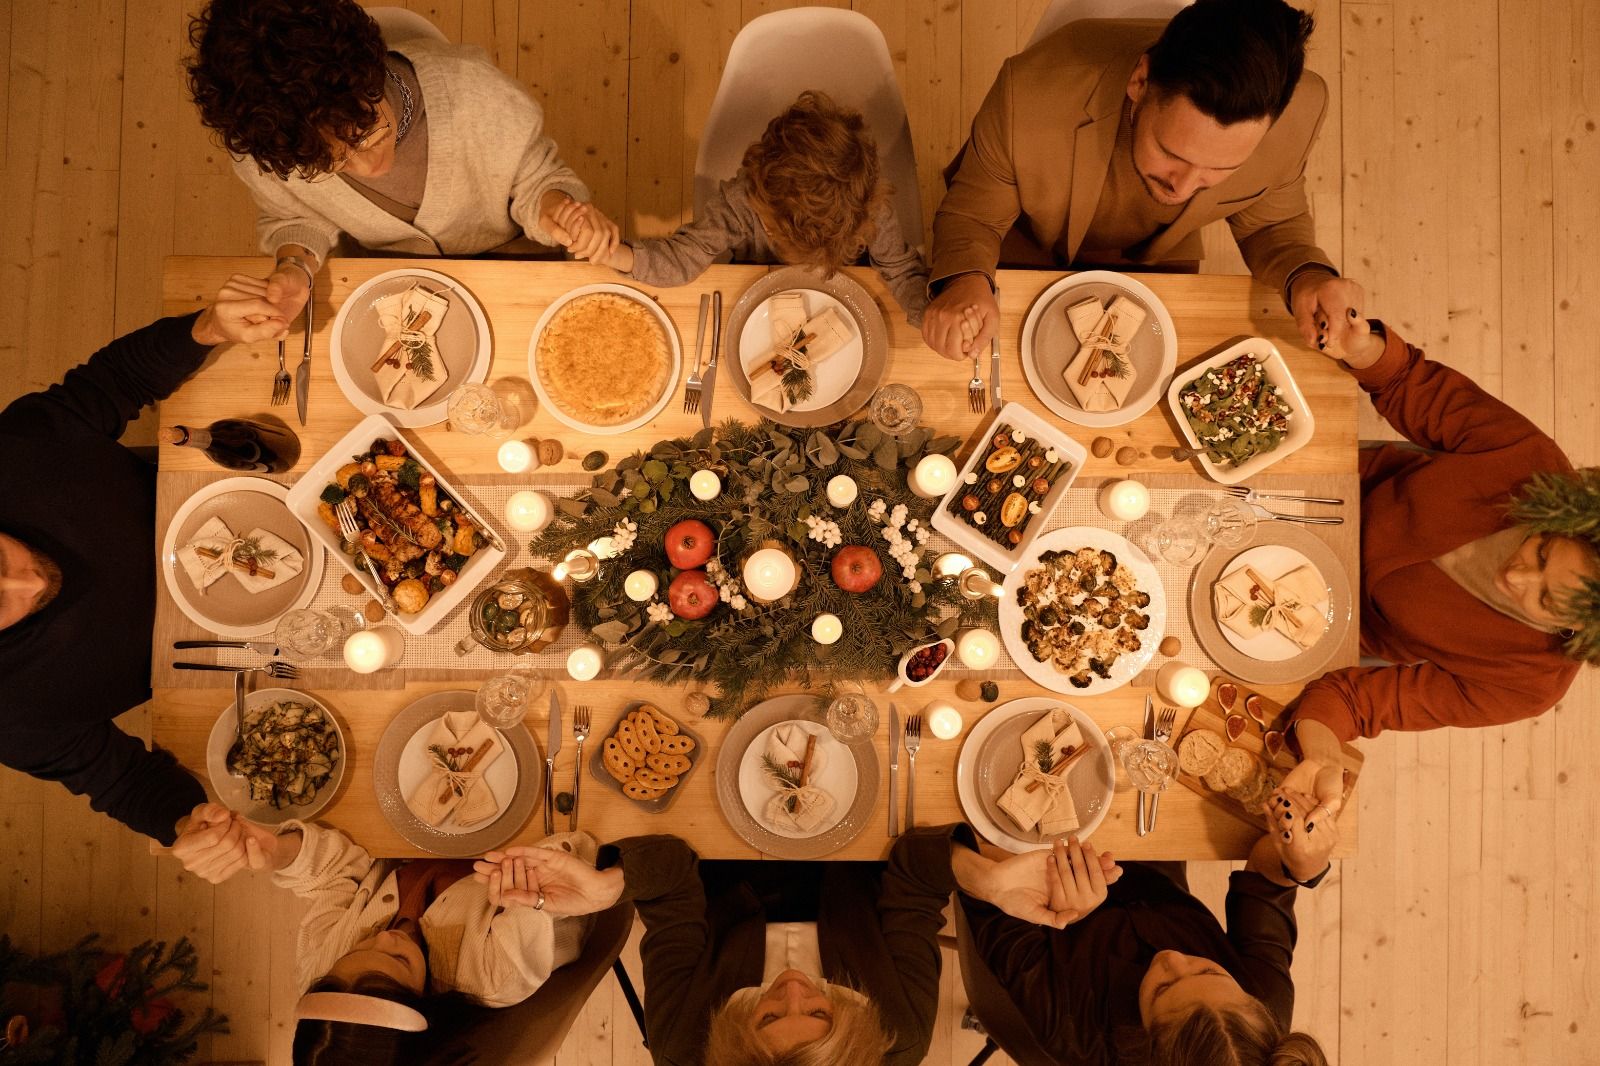 Photo by Nicole Michalou : https://www.pexels.com/photo/top-view-of-a-family-praying-before-christmas-dinner-5779170/